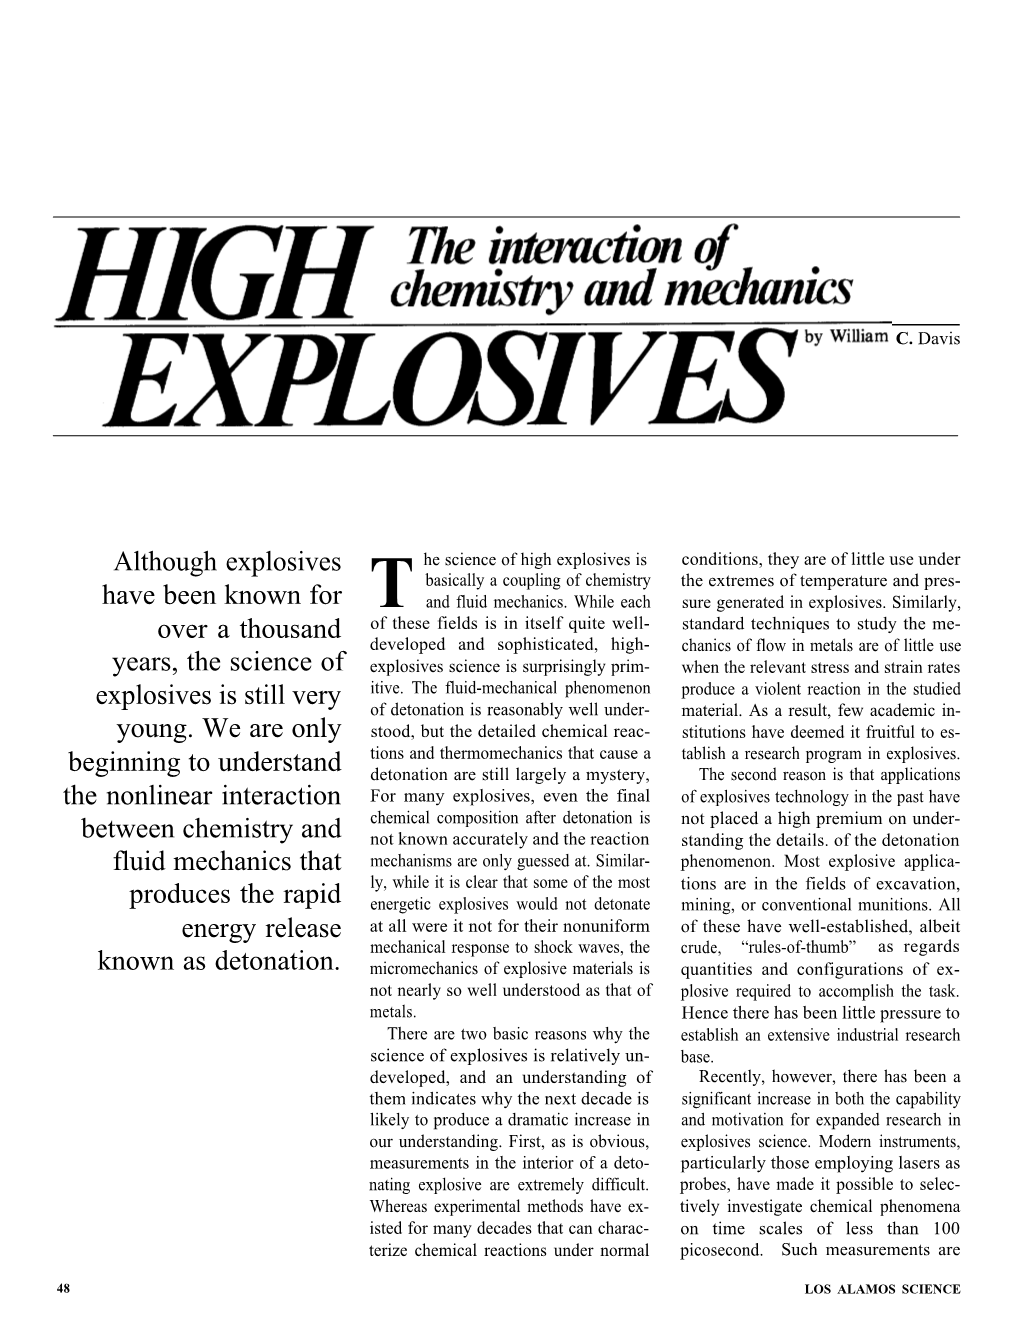 High Explosives: the Interaction of Chemistry and Mechanics